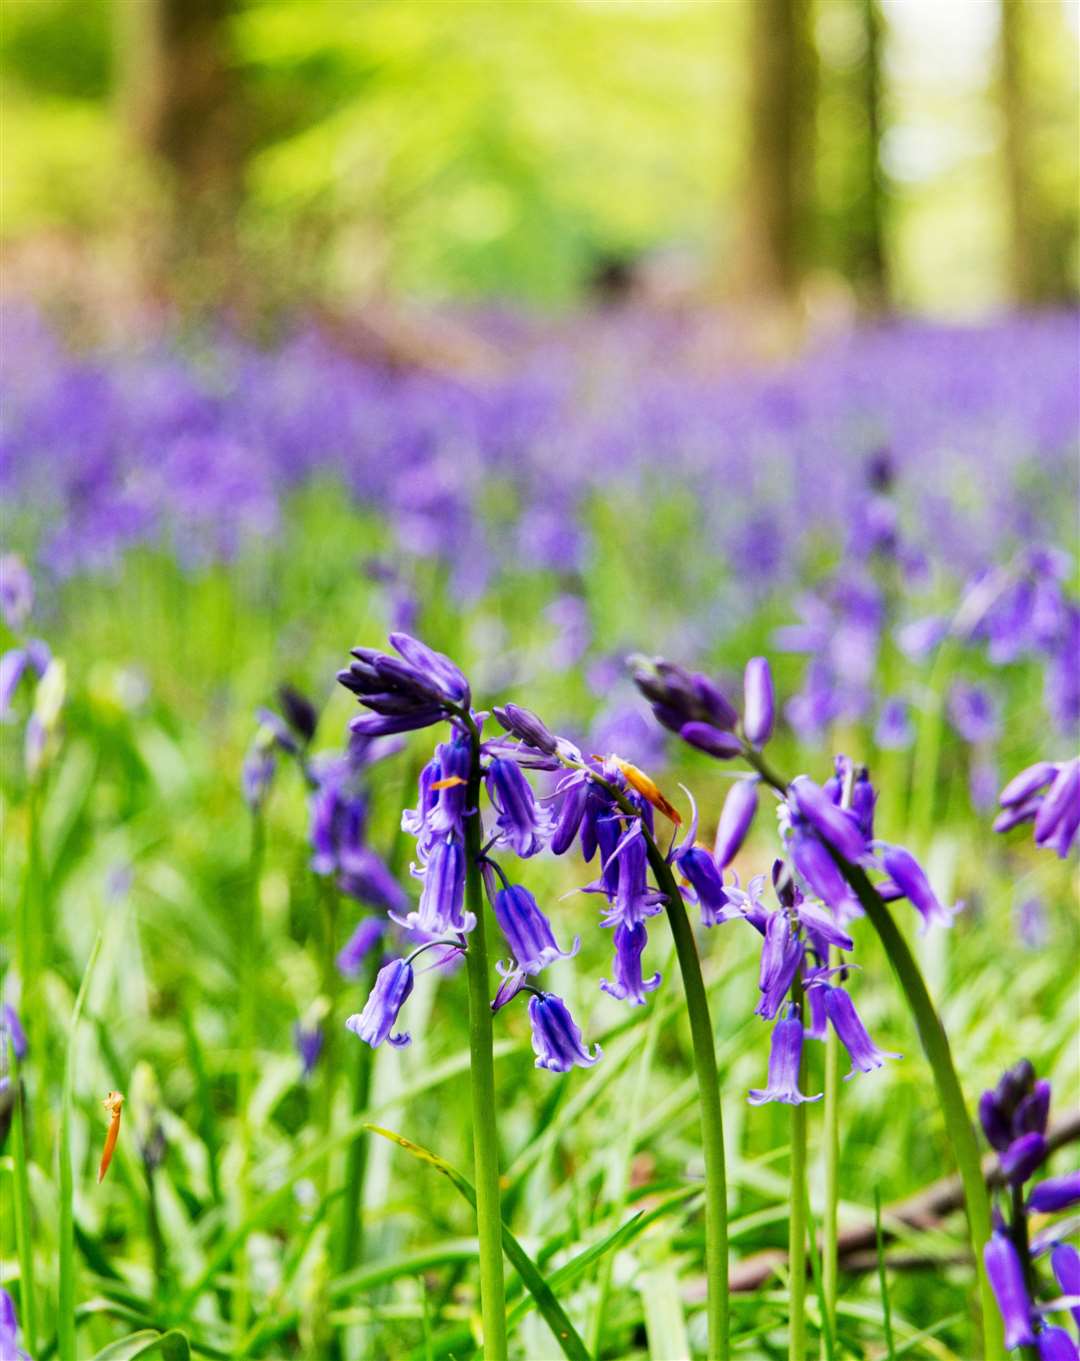 Bluebells growing on the woodland floor - make sure you don't step on them